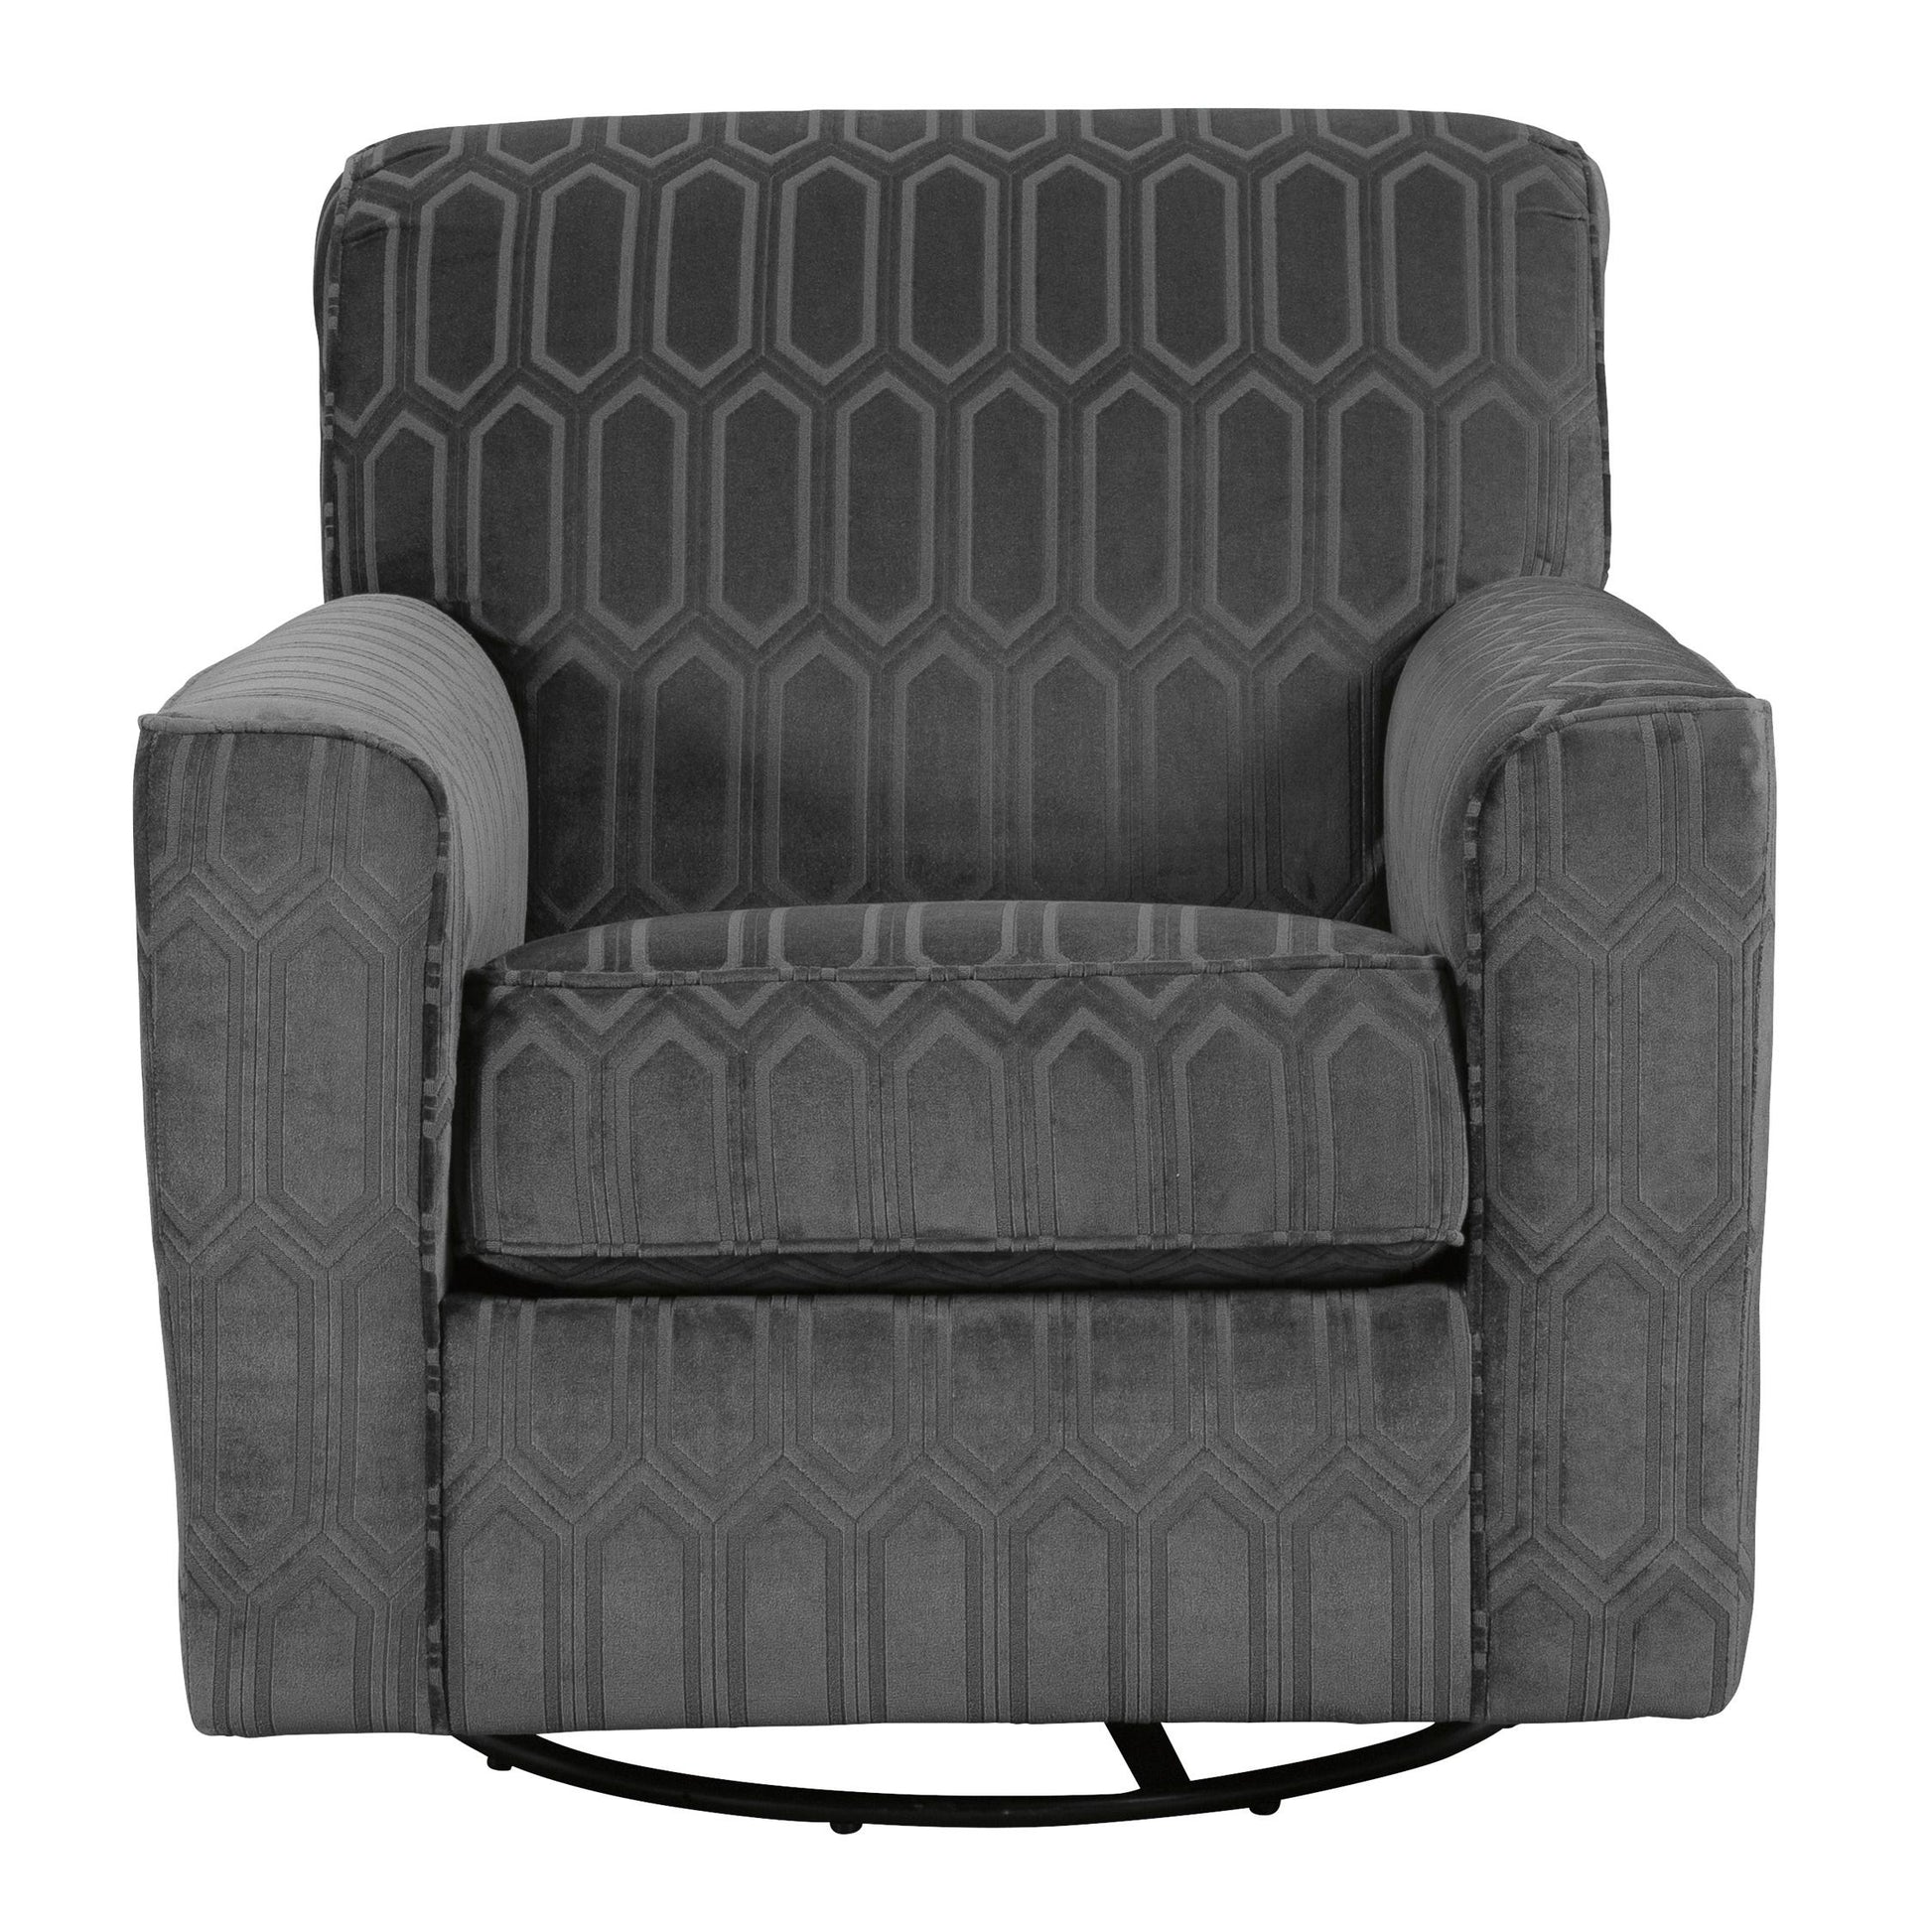 Signature Design by Ashley Zarina Swvel Fabric Accent Chair 9770442